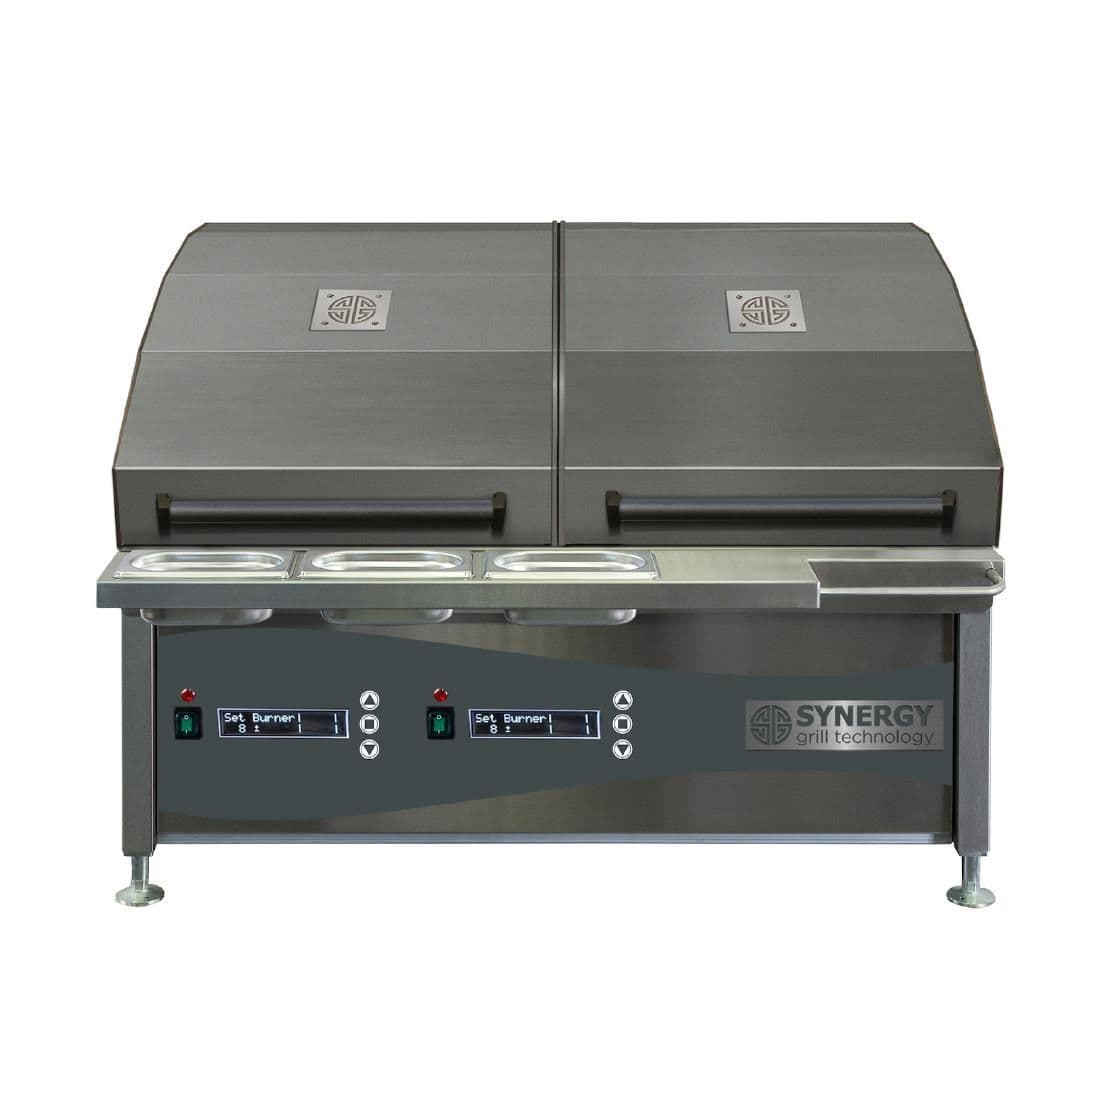 CX888 Synergy Grill Electric Chargrill Oven with Twin Lids CGO900DUALE JD Catering Equipment Solutions Ltd